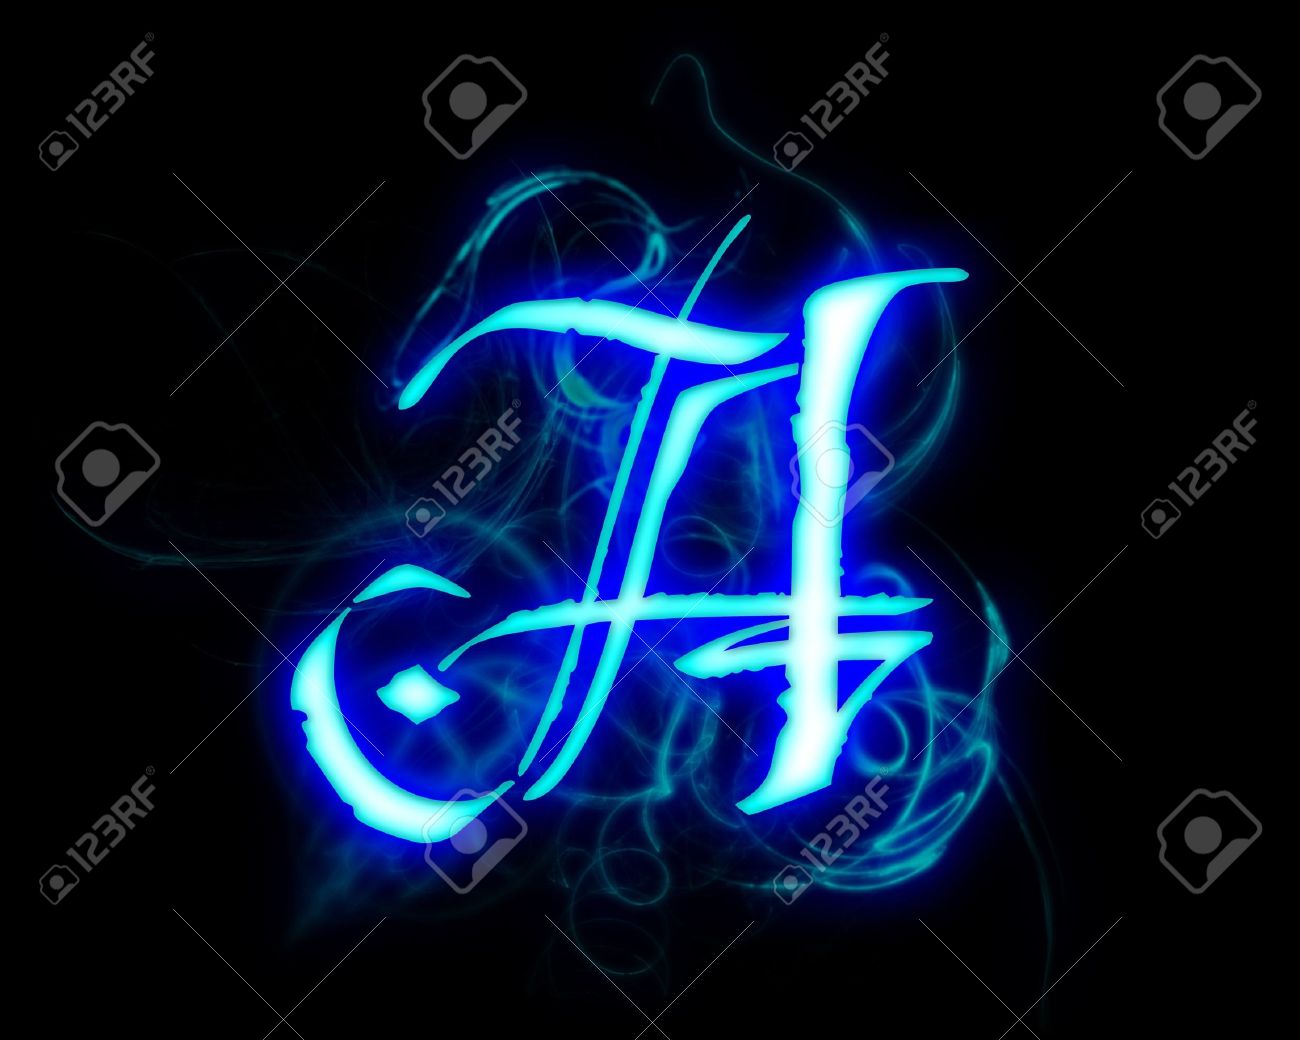 Blue Flame Magic Font Over Black Background Letter A Stock Photo